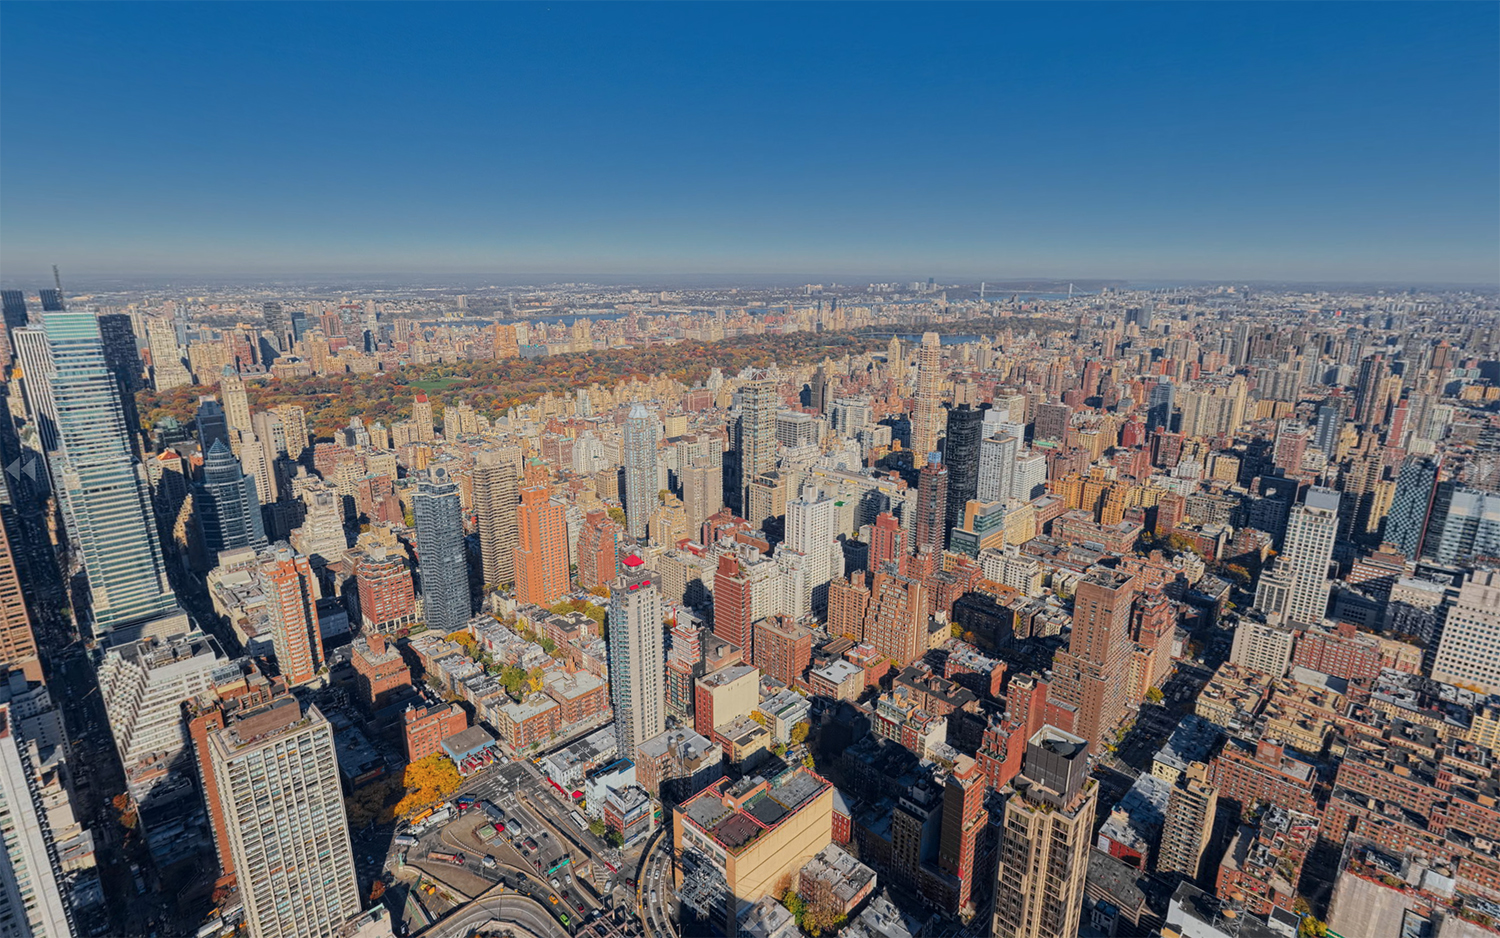 View from 428-432 East 58th Street, 900 feet up. Via Bauhouse Group.